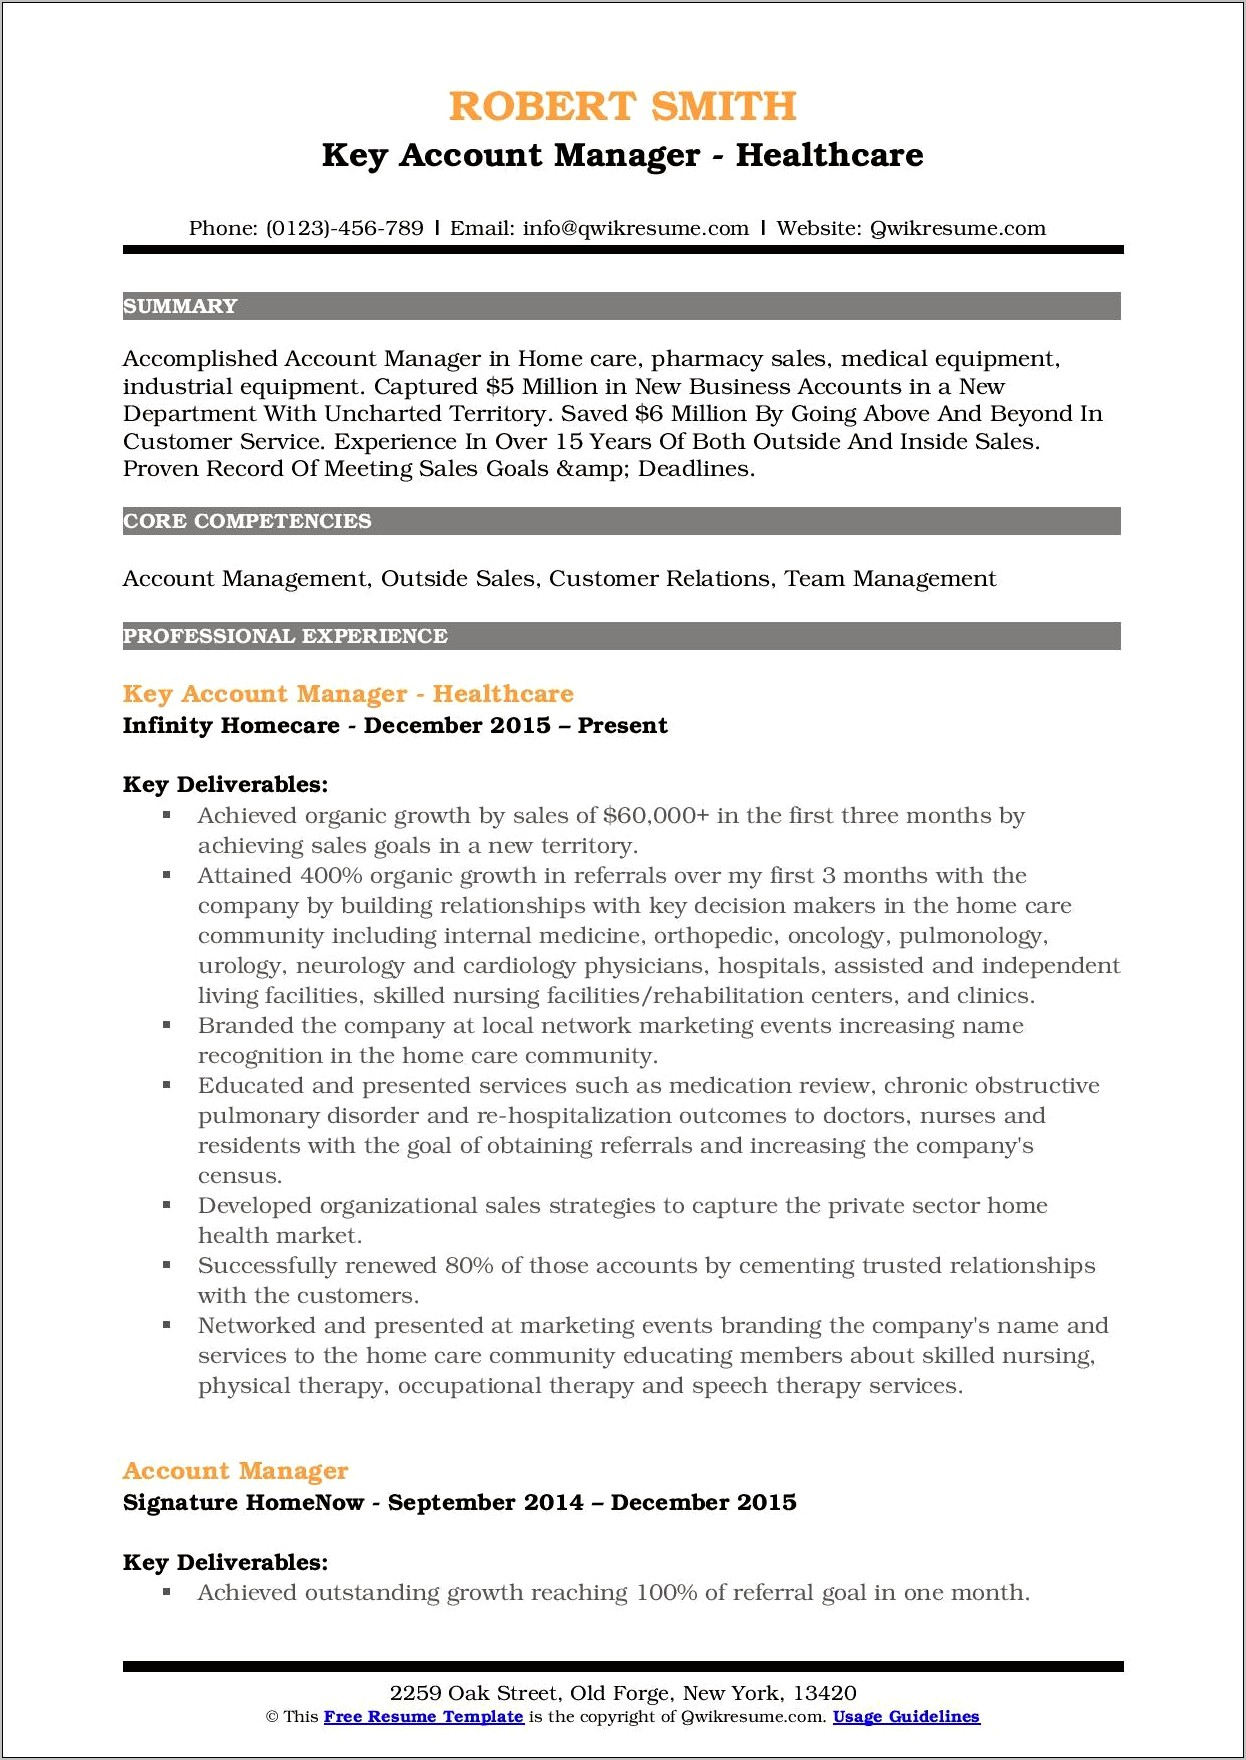 Resume For Business Account Manager